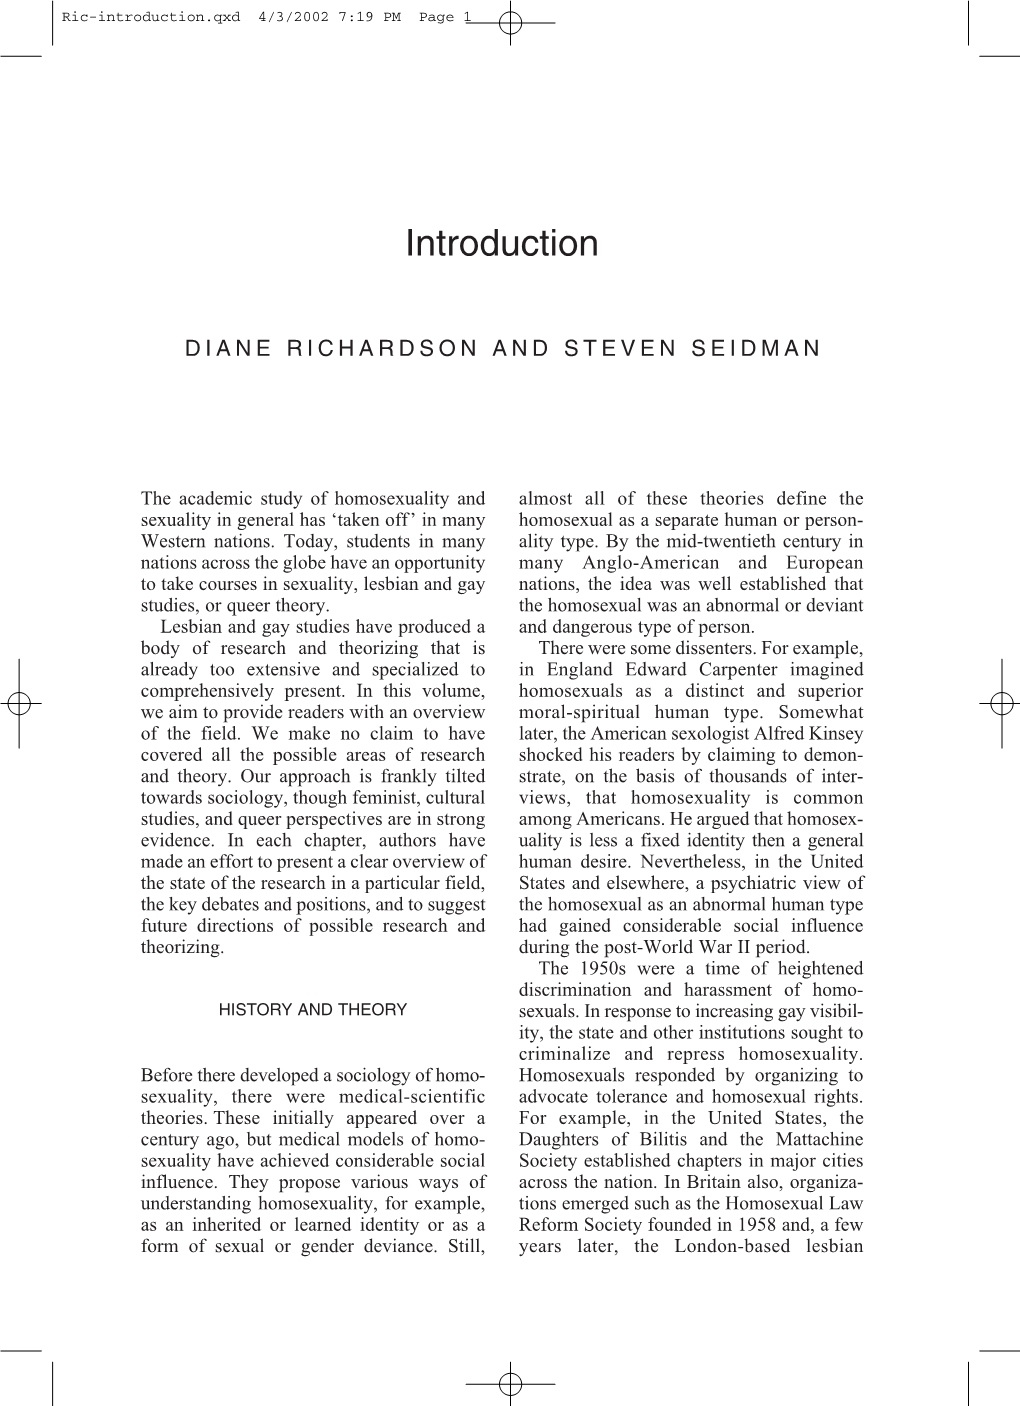 PDF File of the Introduction